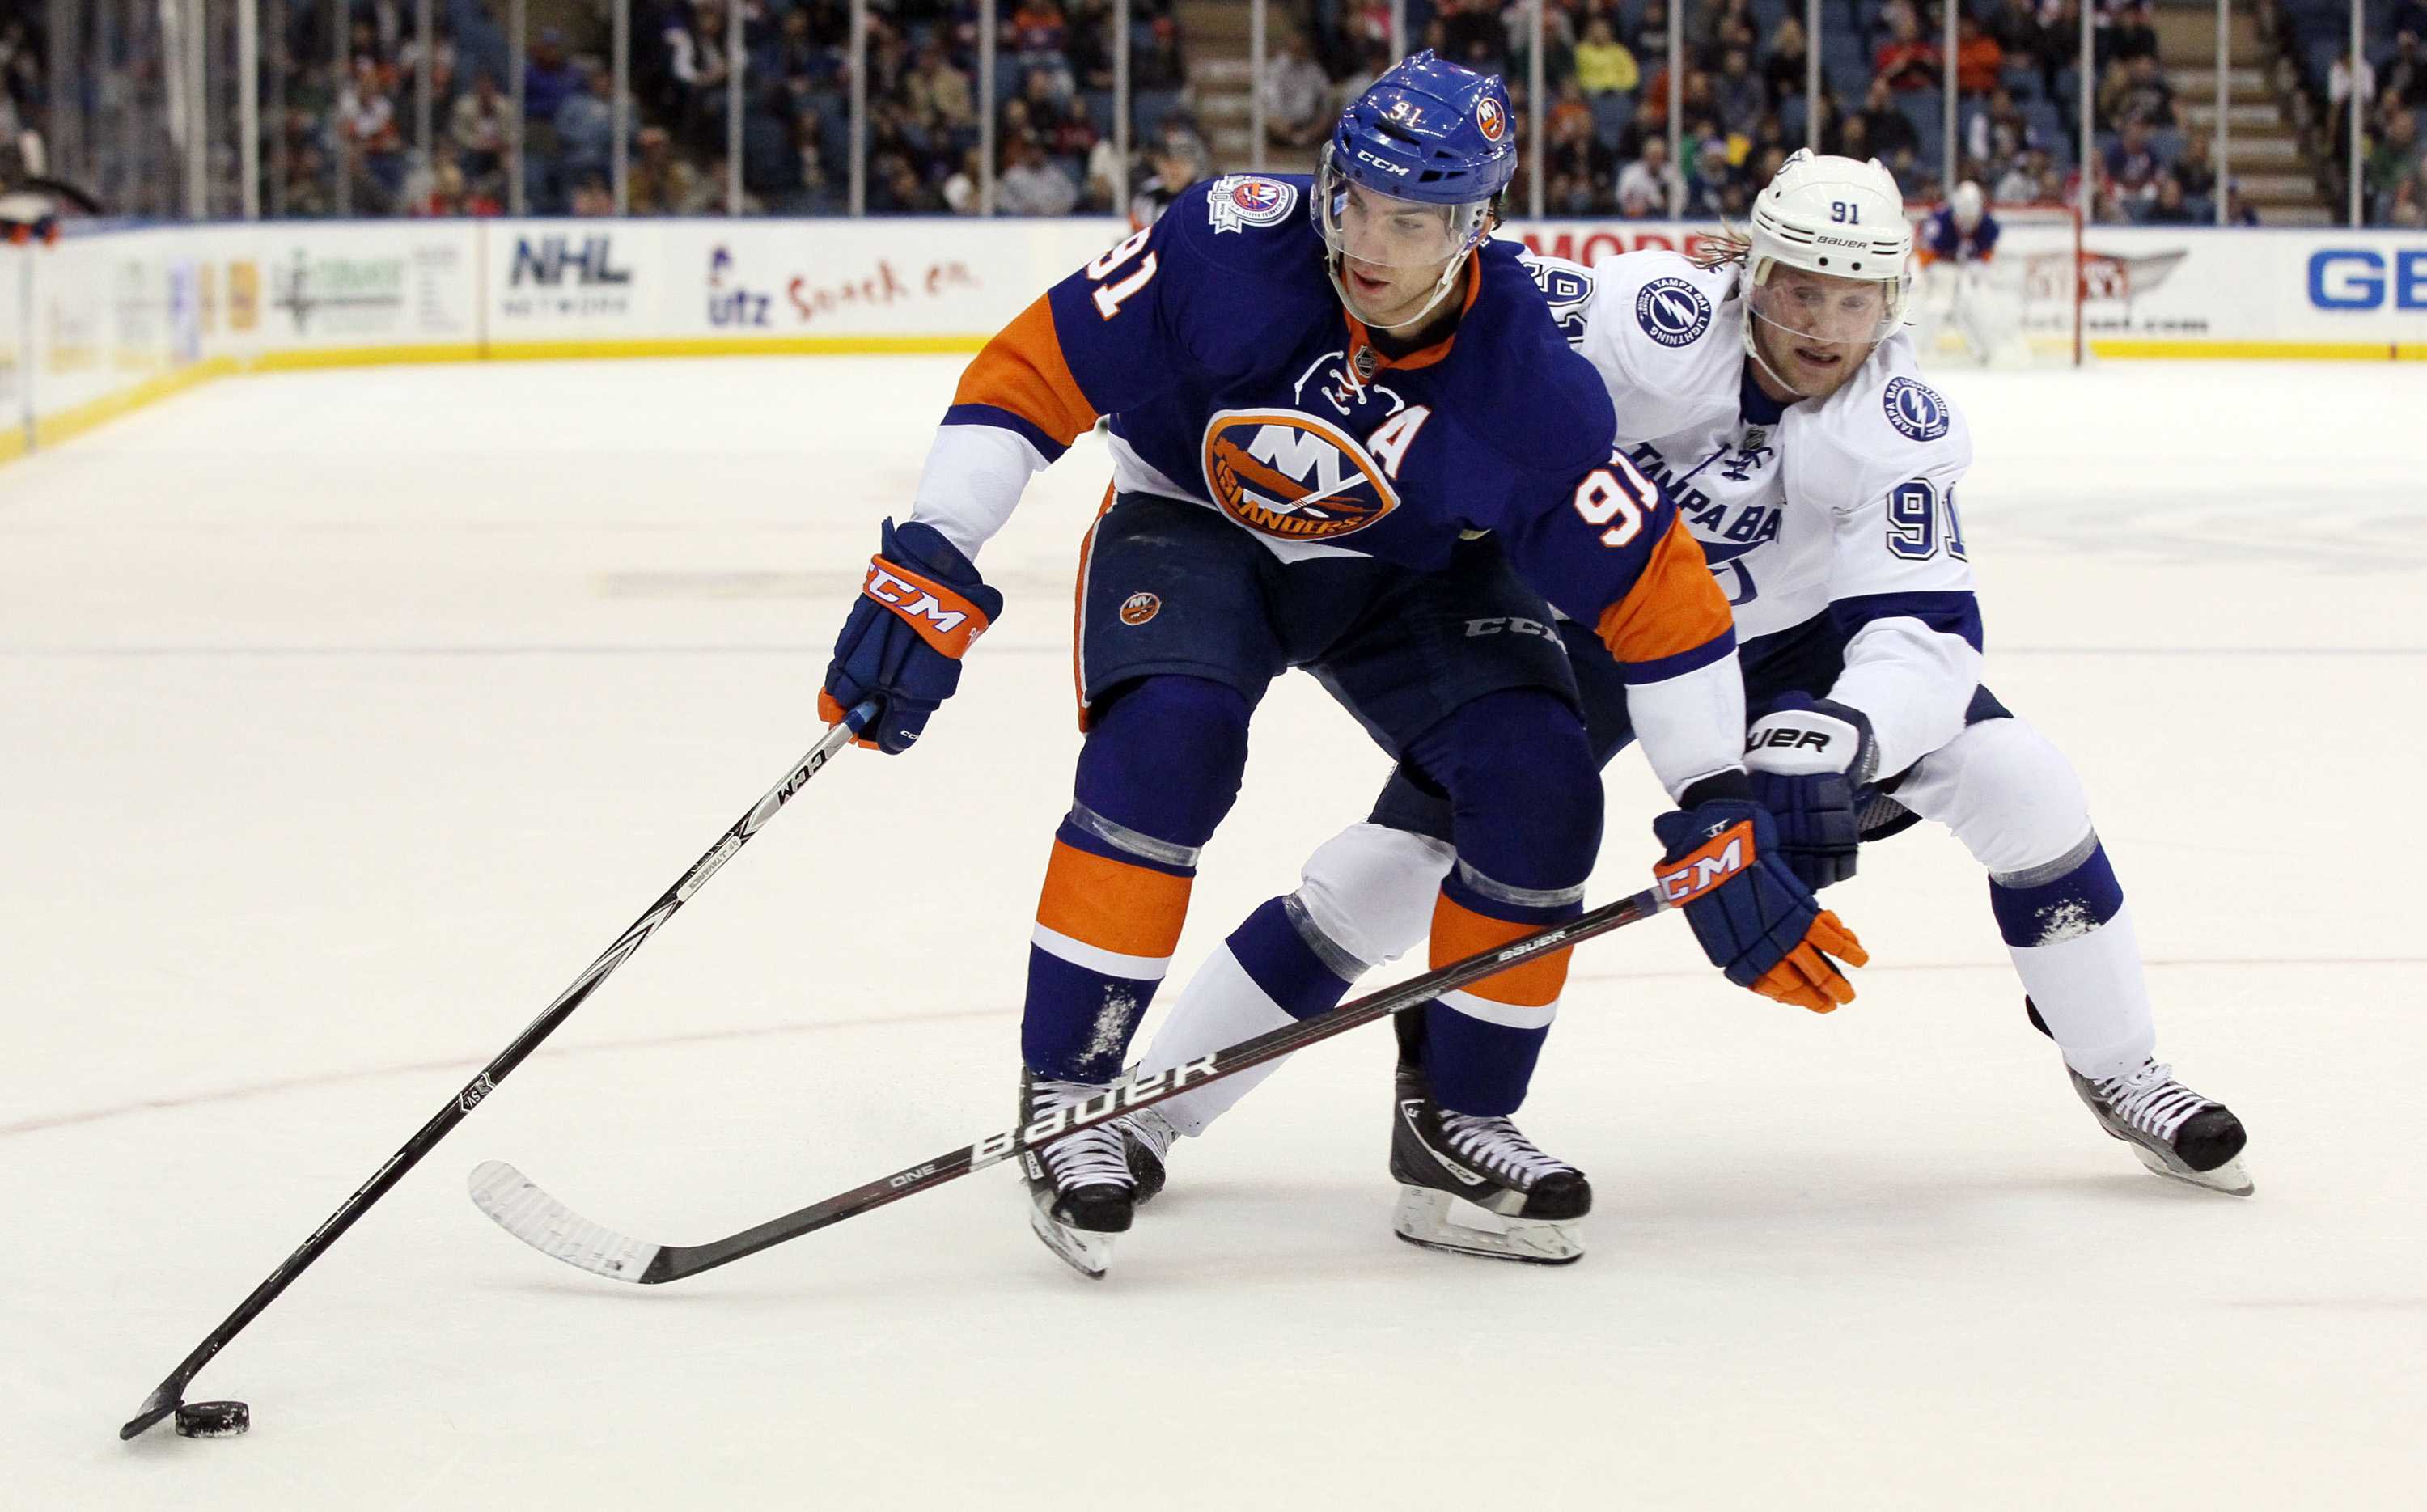 Tavares (left) has been unstoppable all season and he is just one of two players in the NHL who are top 10 in goals and top 15 in assists.
Photo courtesy of TNS.